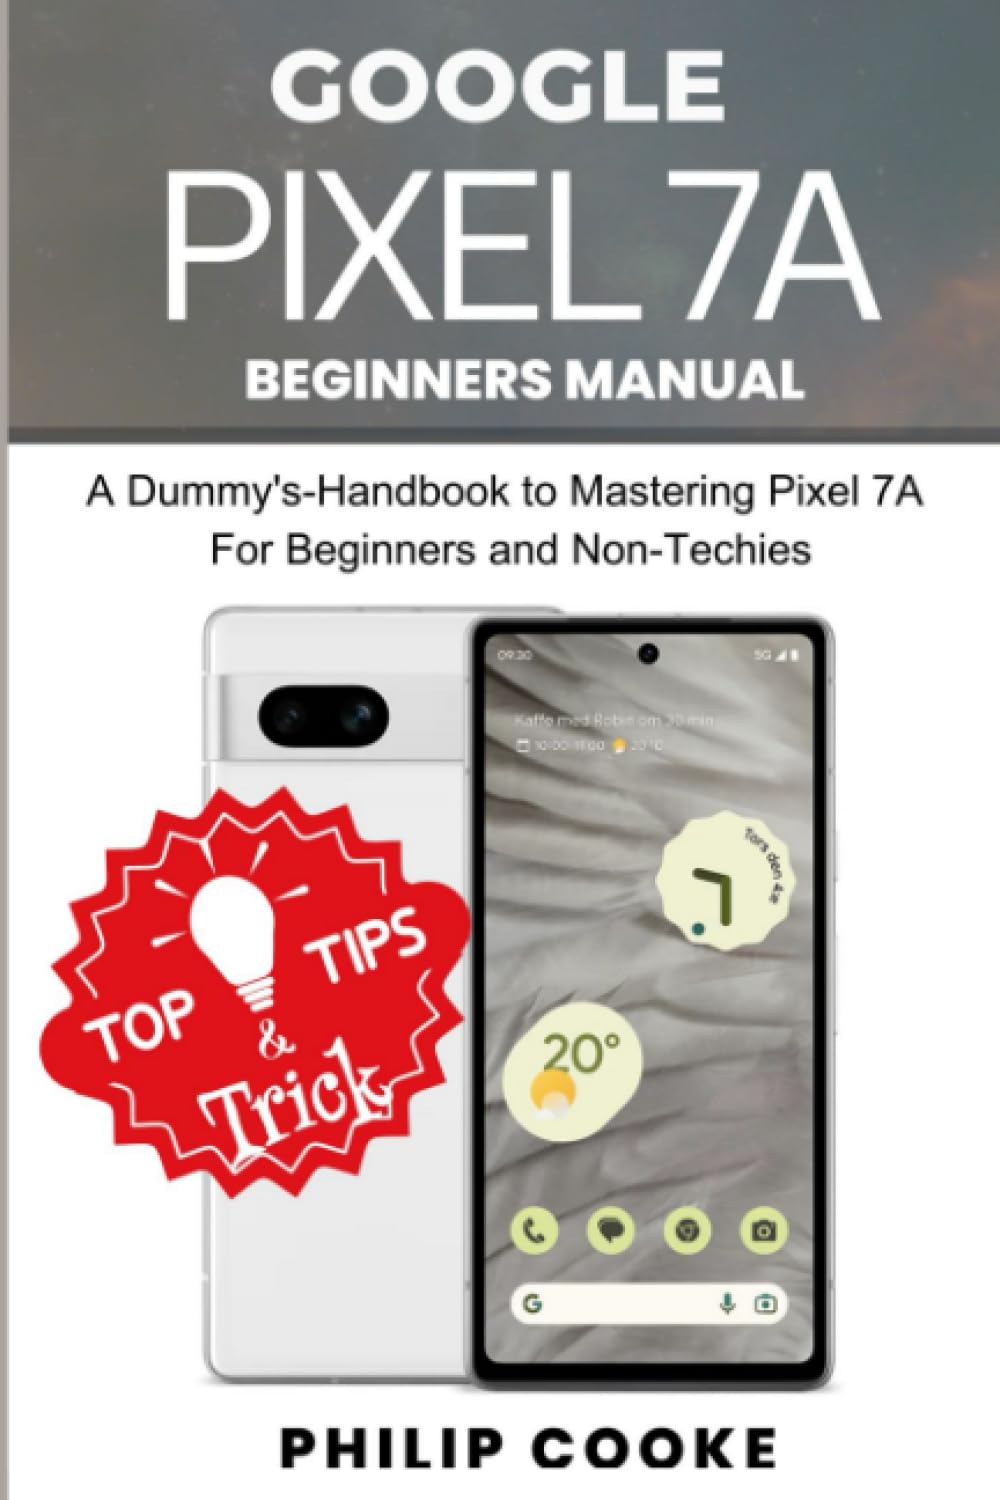 GOOGLE PIXEL 7A BEGINNERS MANUAL: A Dummy's-Handbook to Mastering Google Pixel 7A for Beginners and Non-Techies